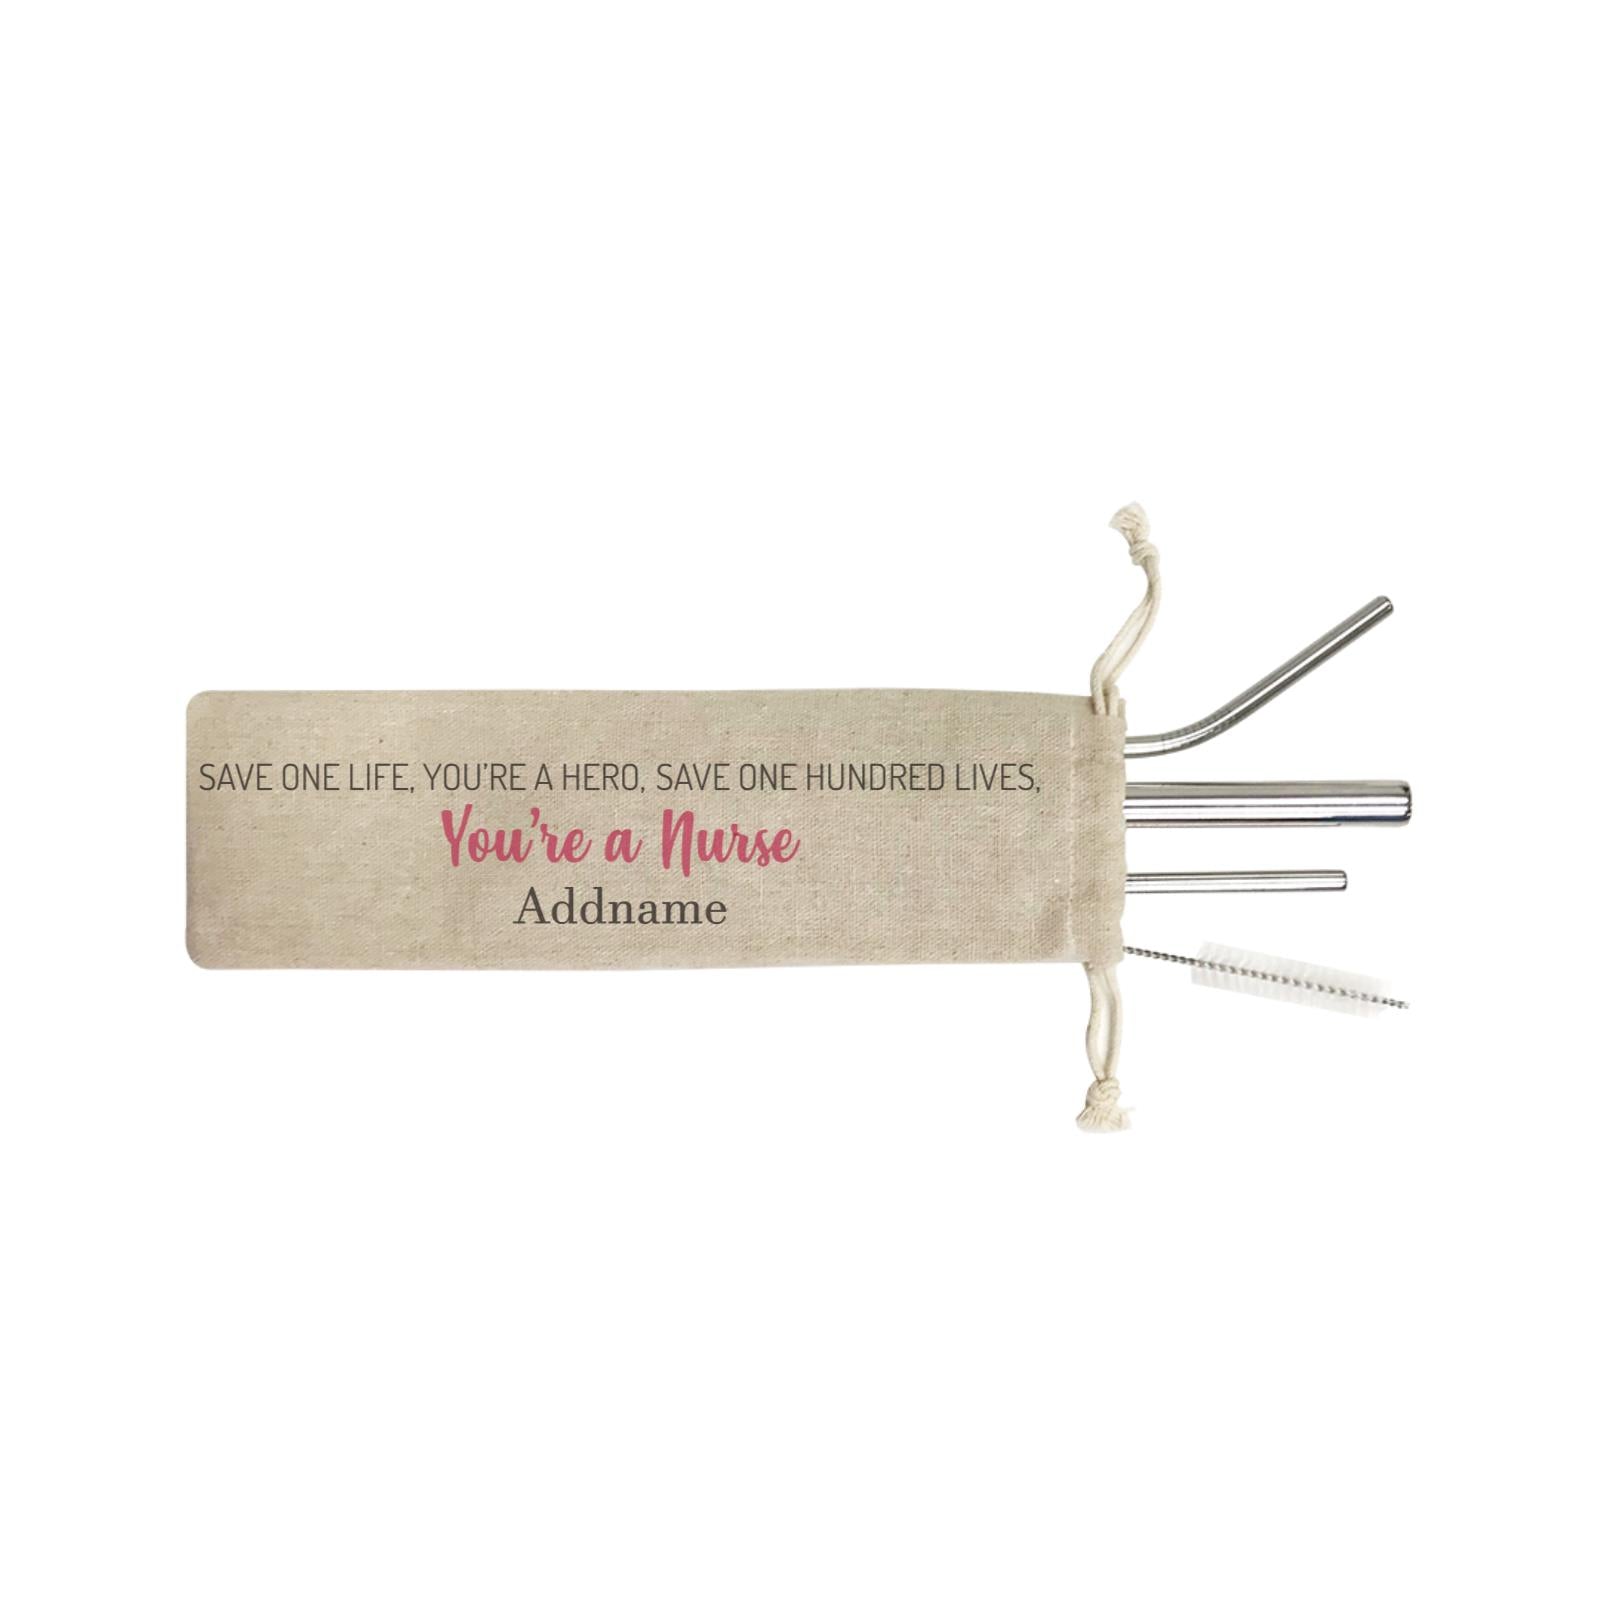 Save One Life, You're A Hero, Save One Hundred Lives, You're A Nurse SB 4-in-1 Stainless Steel Straw Set In a Satchel